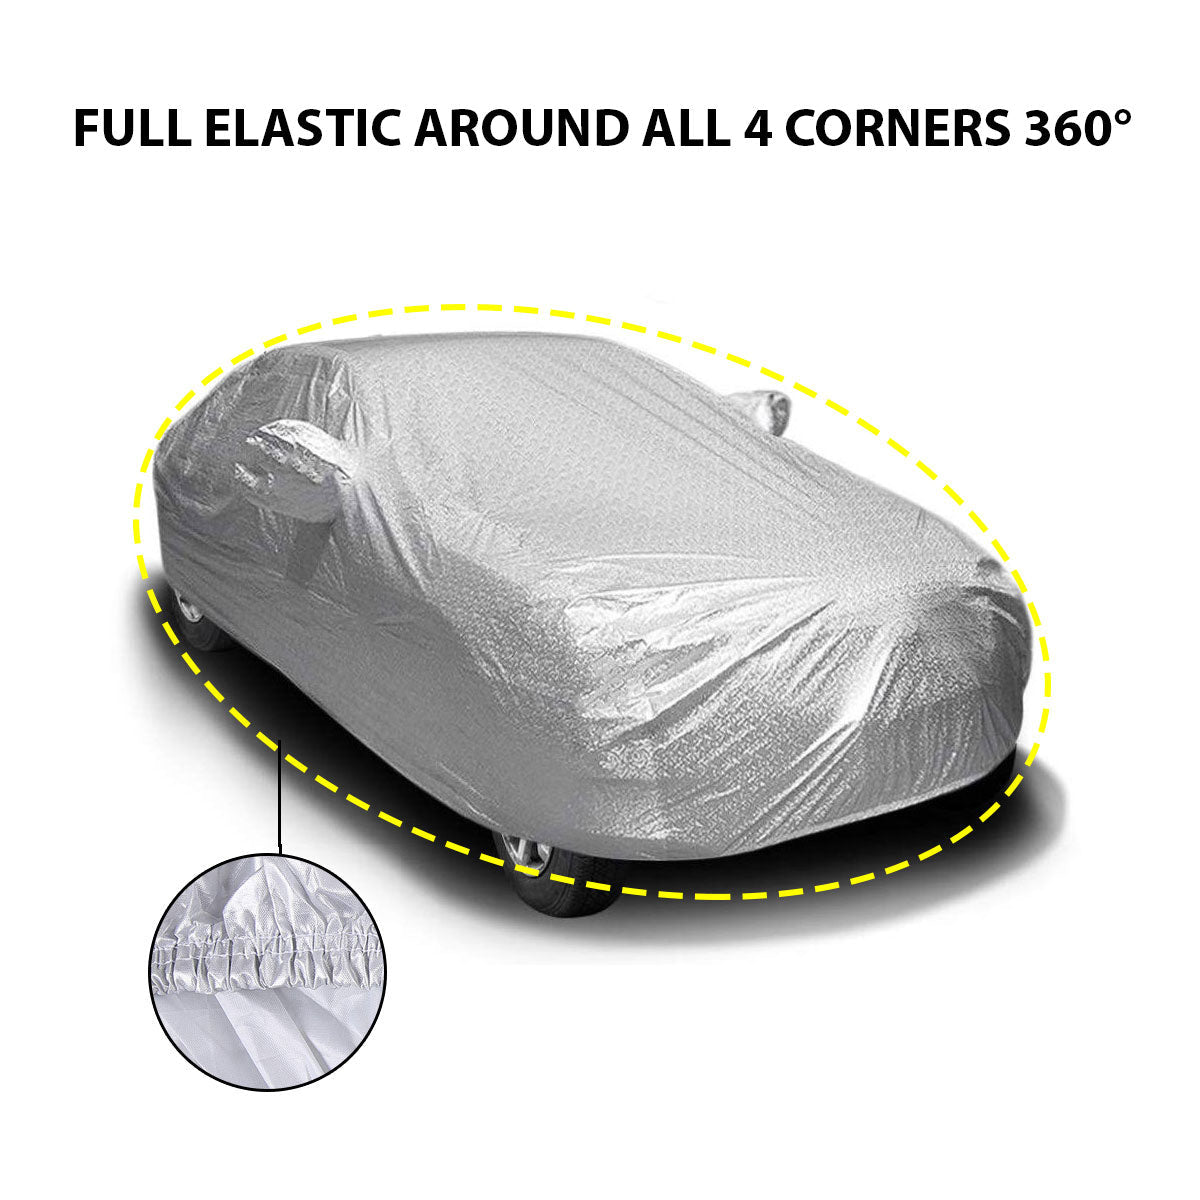 Oshotto Spyro Silver Anti Reflective, dustproof and Water Proof Car Body Cover with Mirror Pockets For Volvo S-60